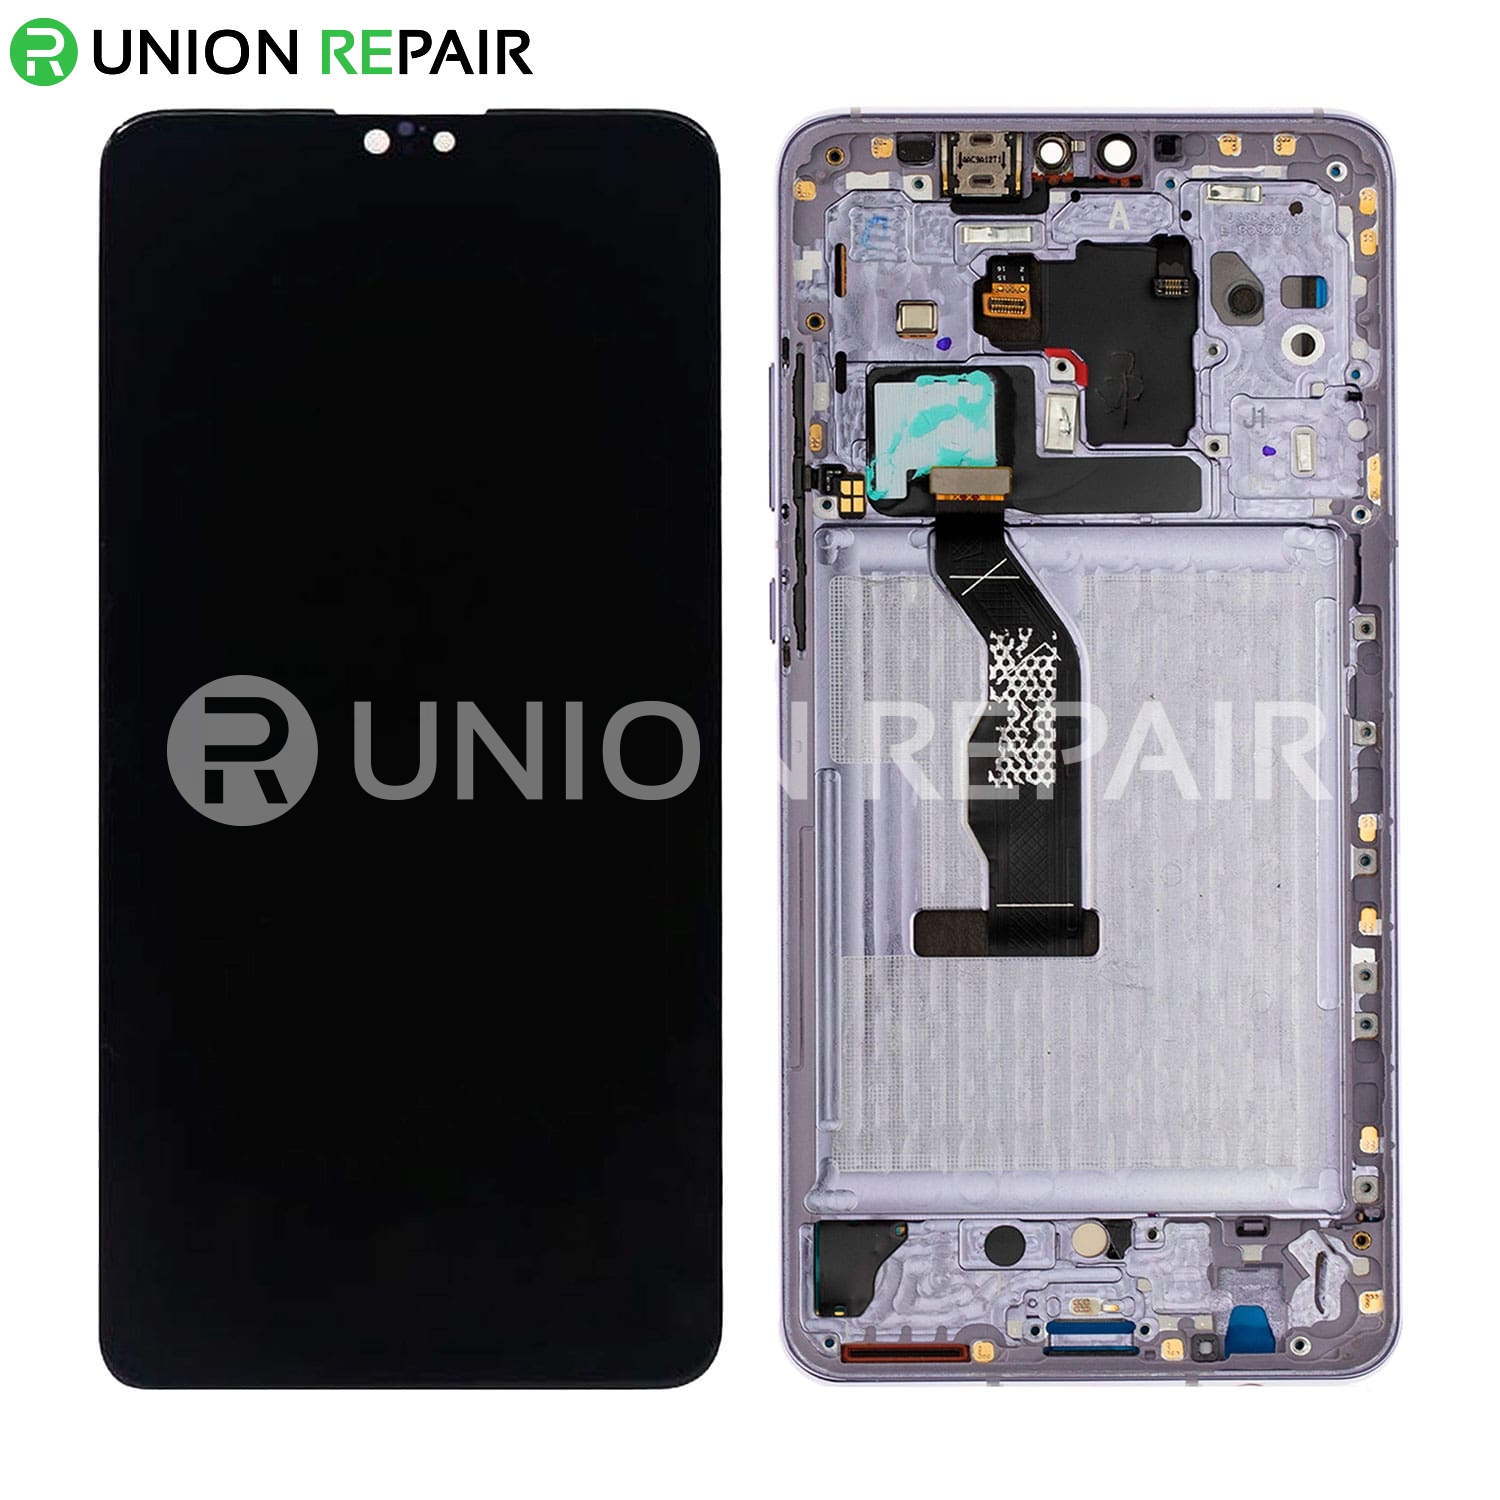 Replacement for Huawei Mate 30 LCD Screen Digitizer Assembly with Frame - Silver